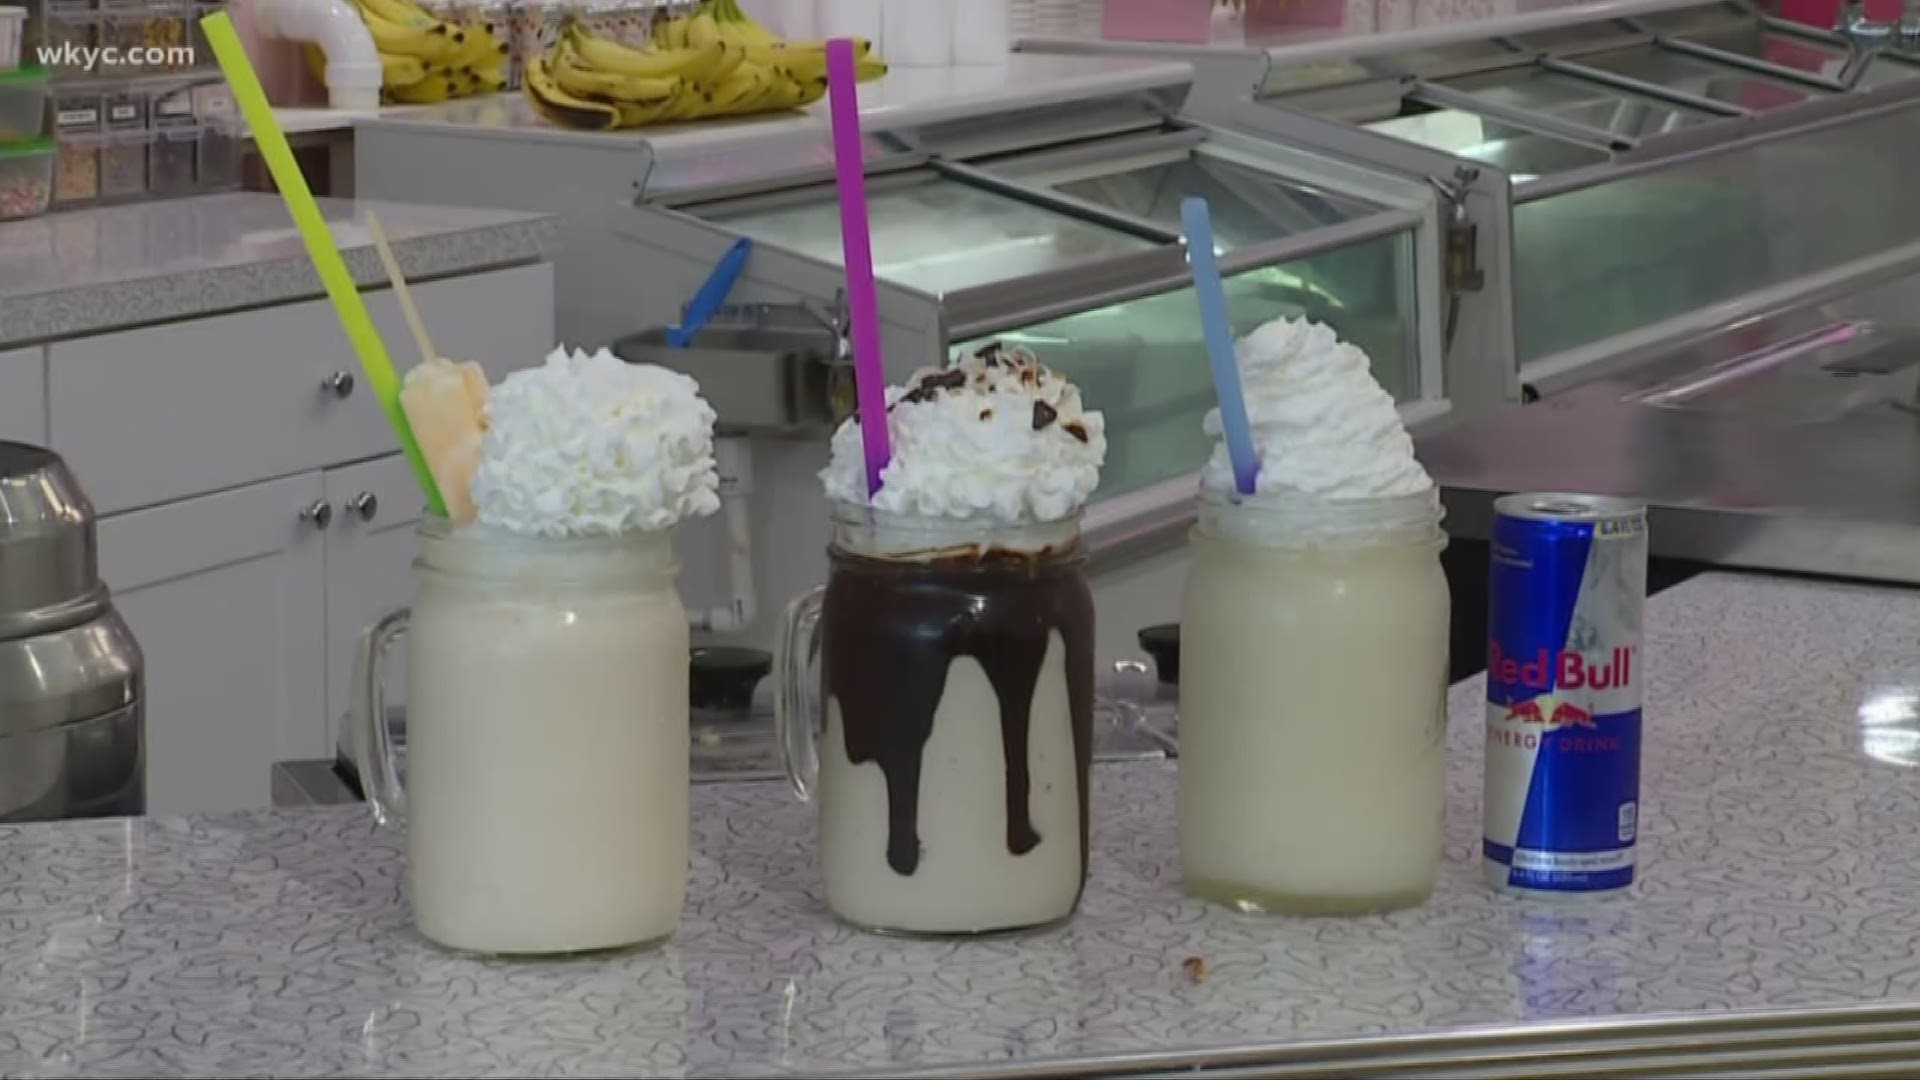 July 12, 2019: I scream, you scream, we all scream for ... boozy ice cream? Yep. Frozen adult treats are a big trend this summer. So, if you're over 21, there's a few spots around Northeast Ohio that you definitely need to try.